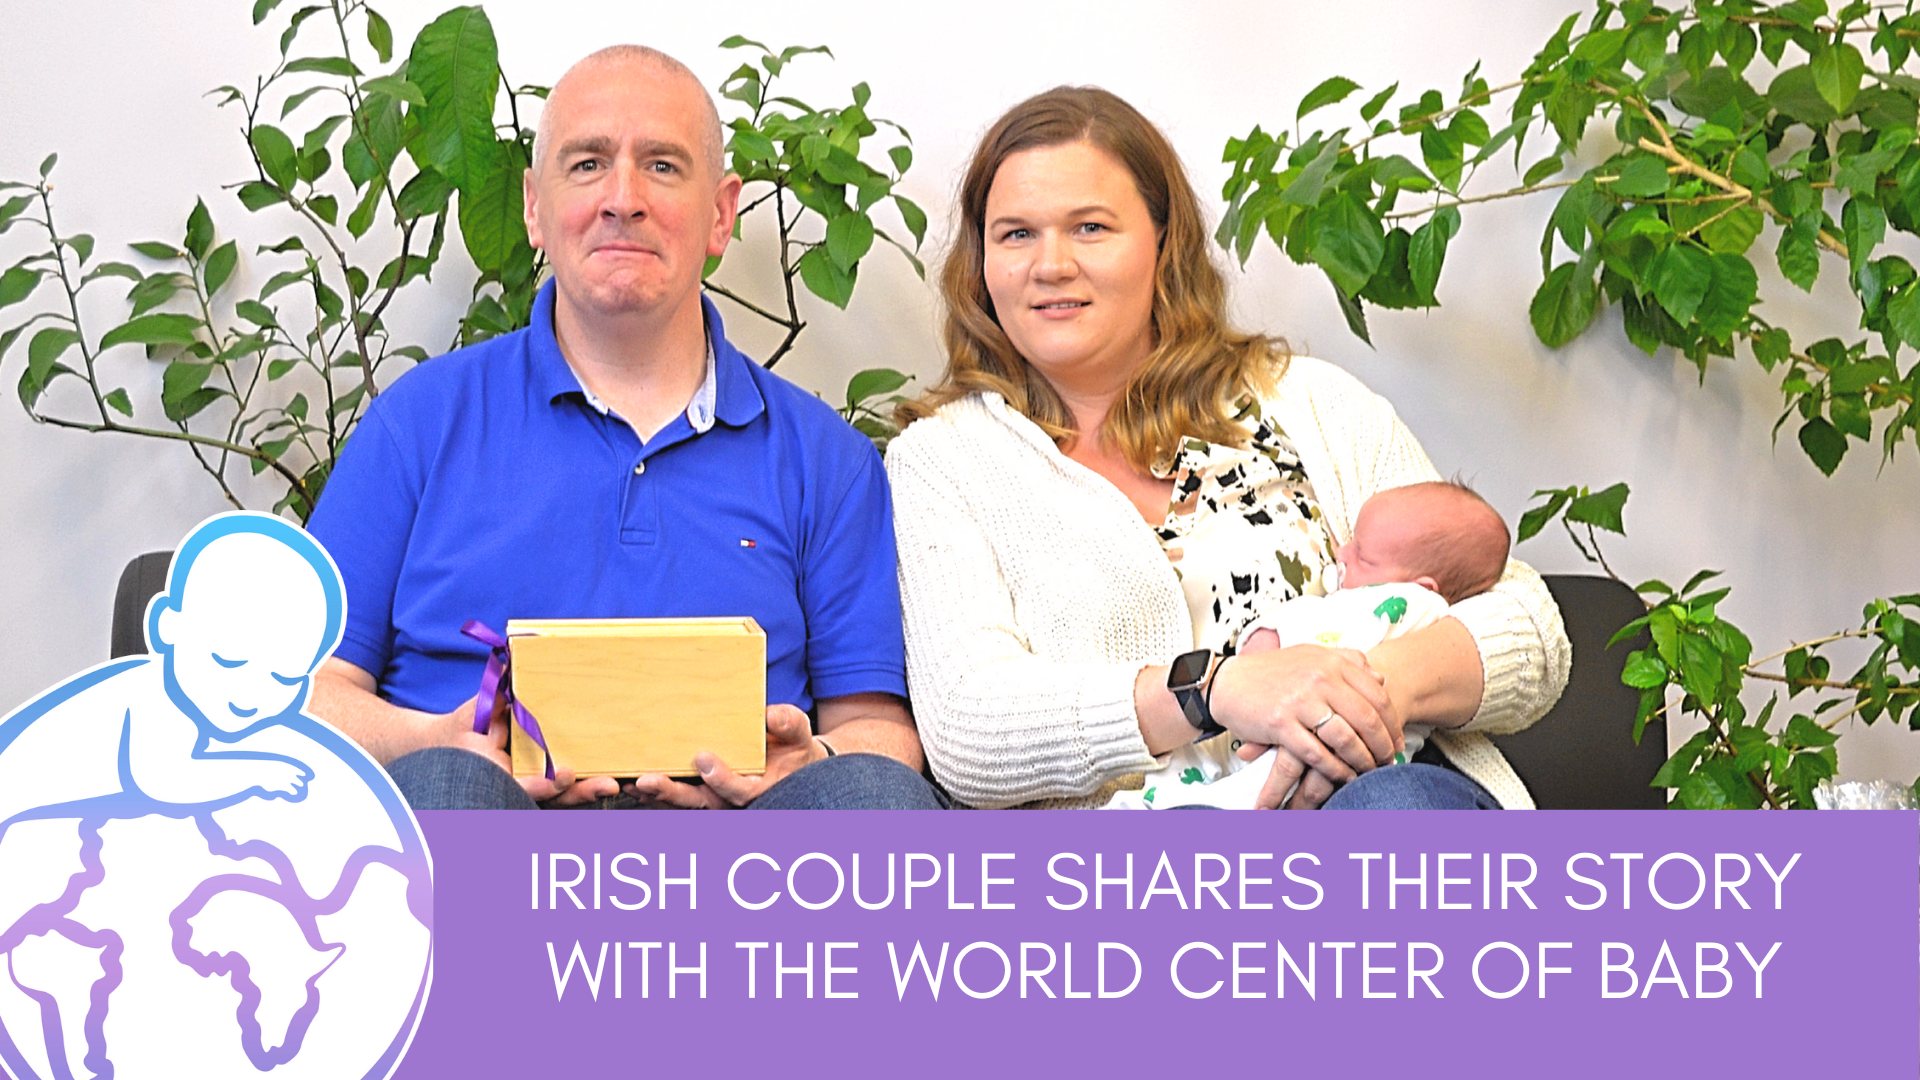 Our Surrogacy Journey — an Irish Couple Shares Their Story With the World Center of Baby